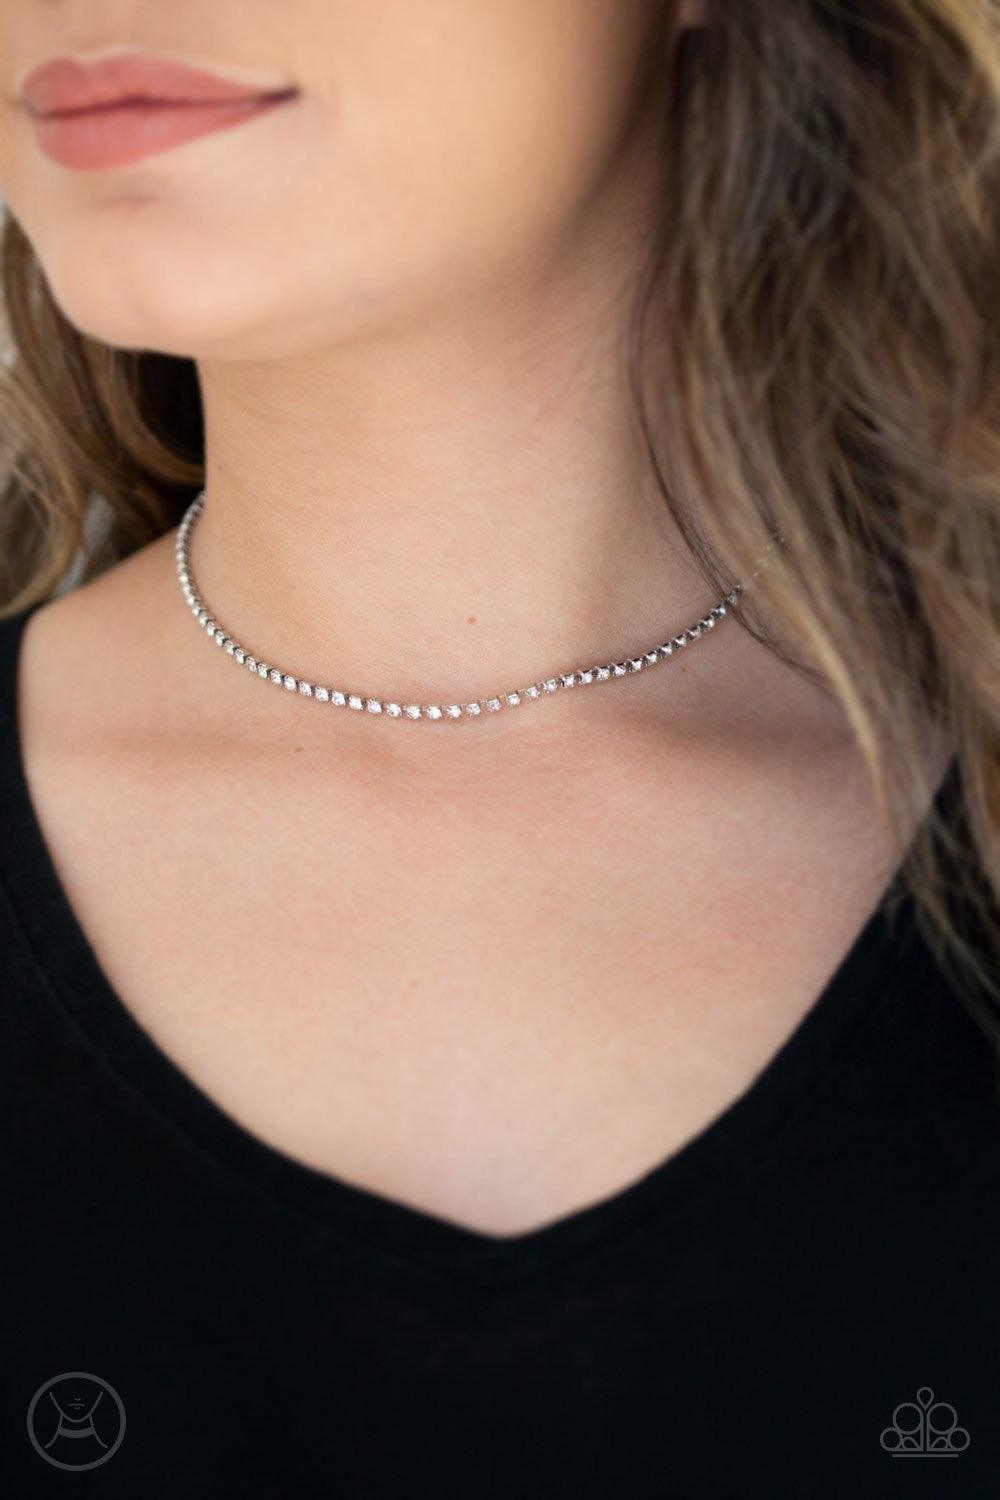 Paparazzi Accessories Pitch PURR-fect - White Pressed into sleek silver square frames, a strand of glittery white rhinestones wraps around the neck for an edgy look Features an adjustable clasp closure. Jewelry